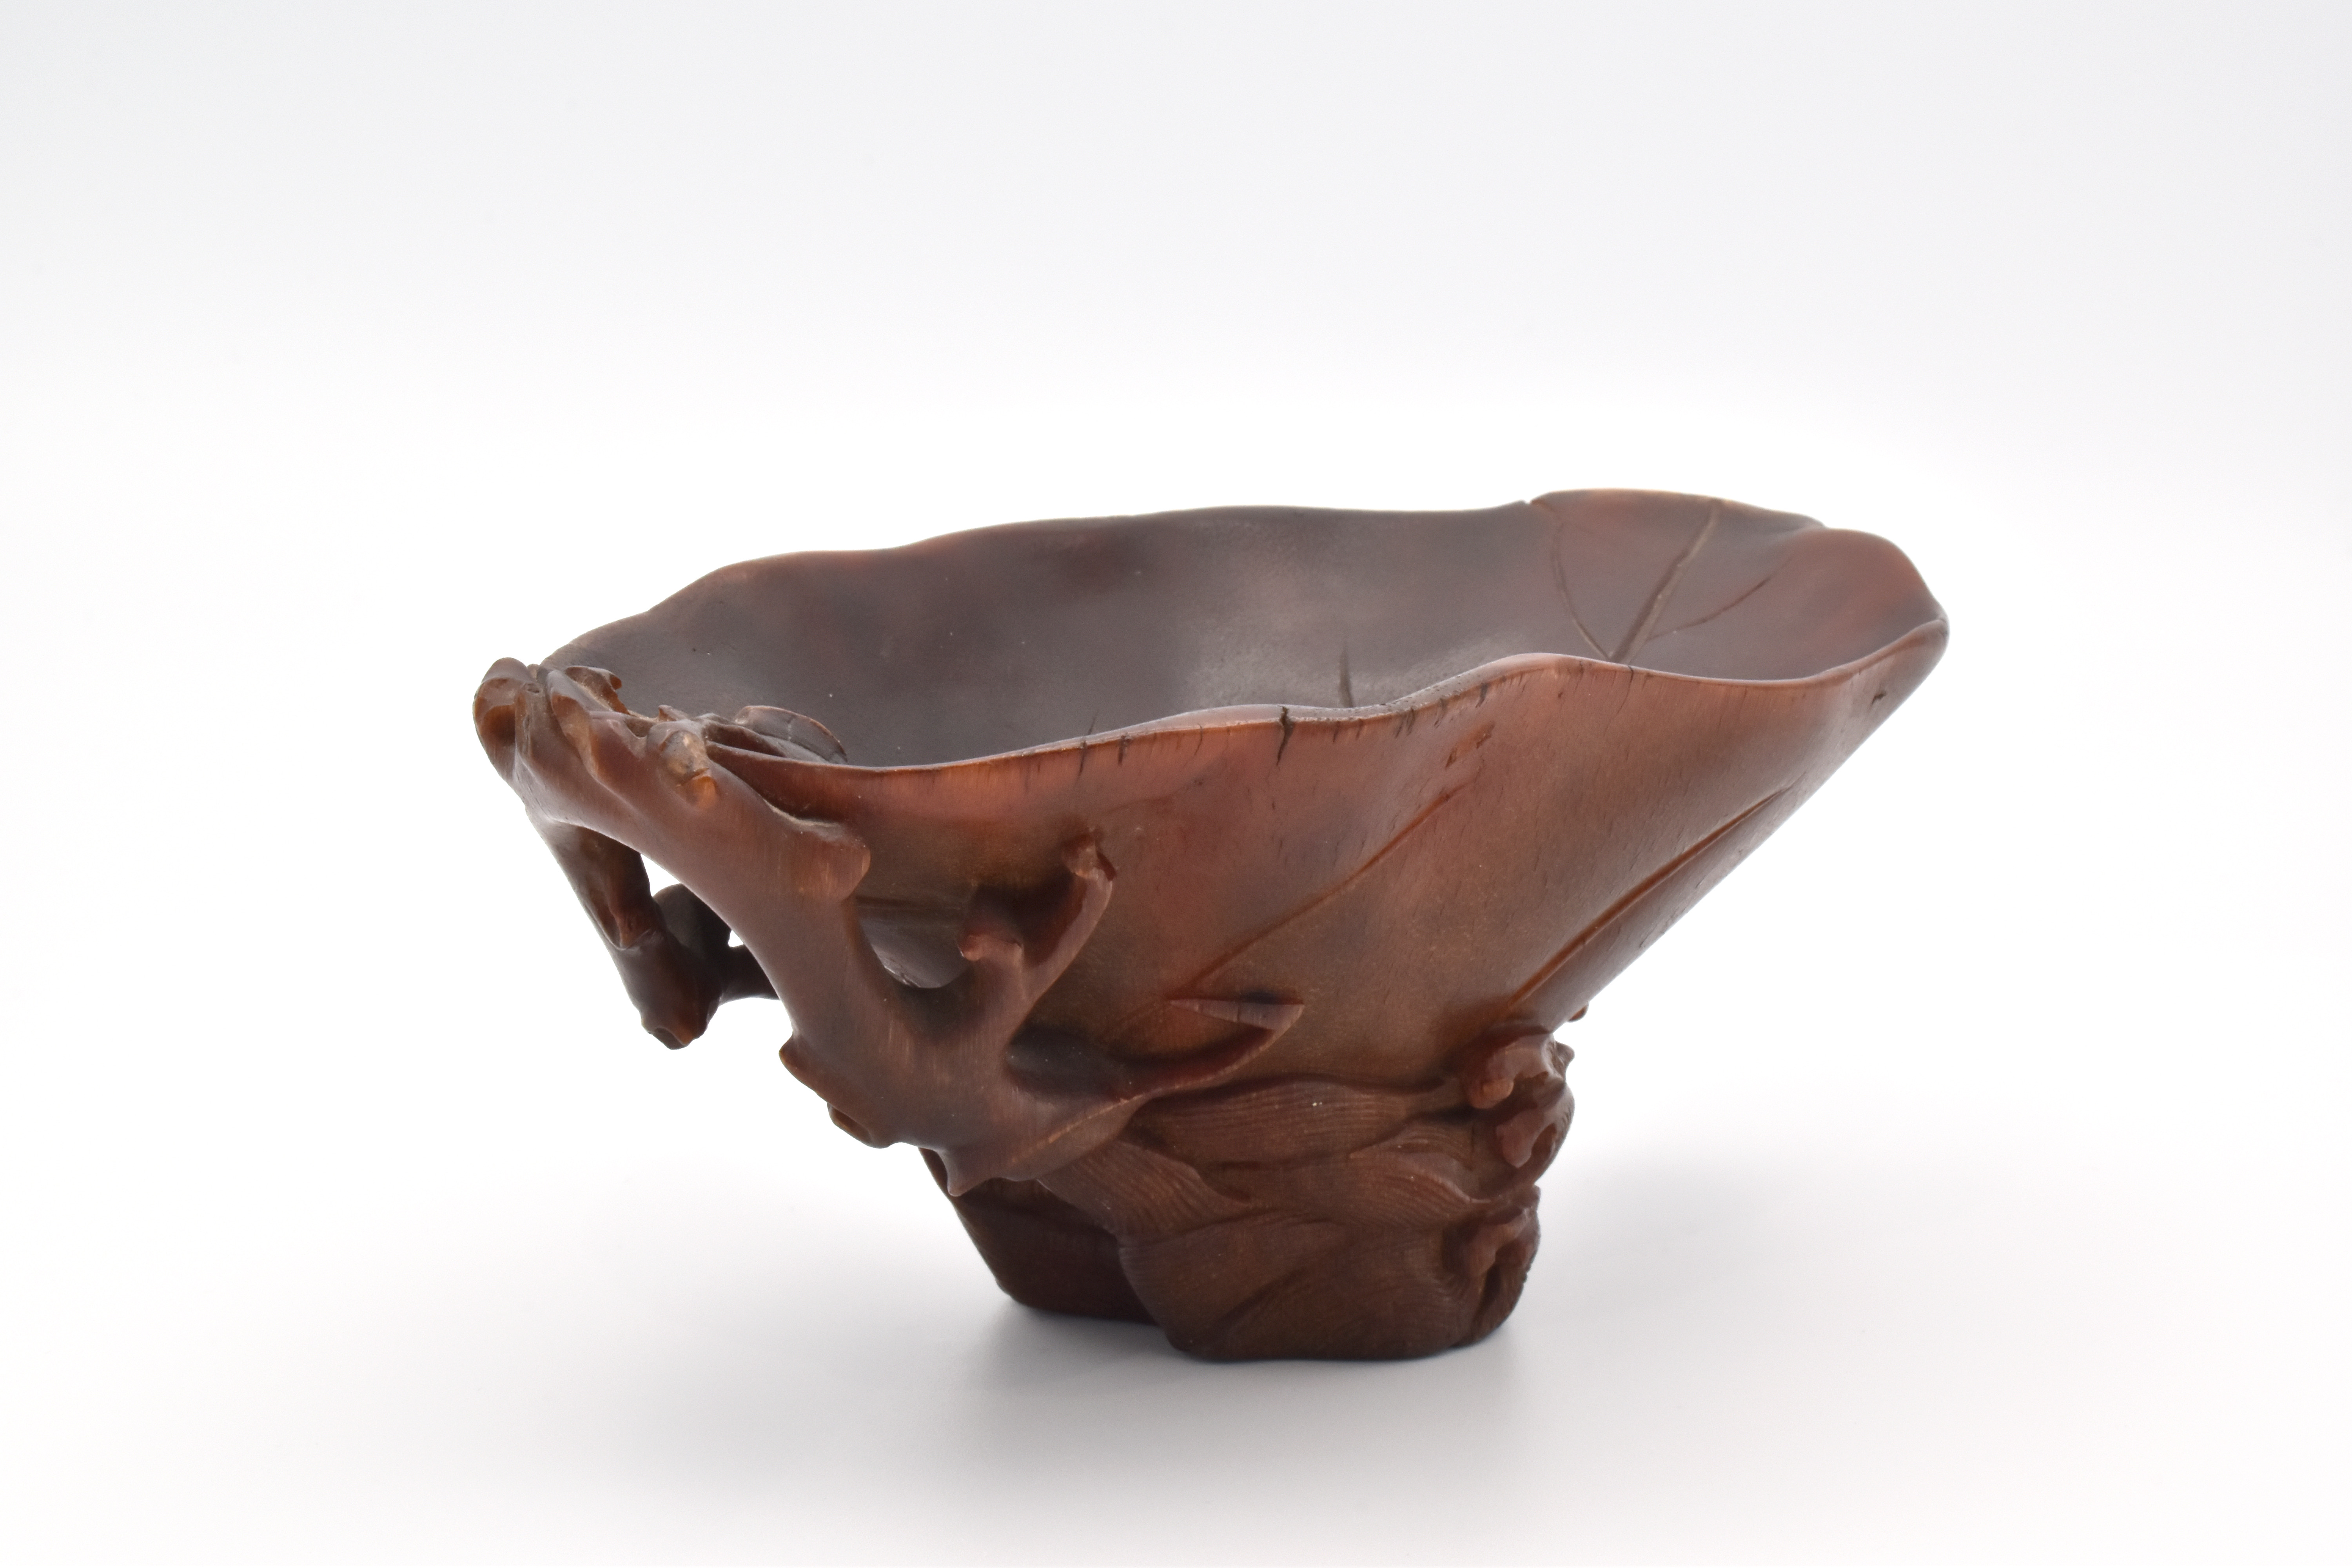 A RARE CHINESE RHINOCEROS HORN ‘CAMELLIA LEAF’ LIBATION CUP, QING DYNASTY, 17TH CENTURY - Image 6 of 30